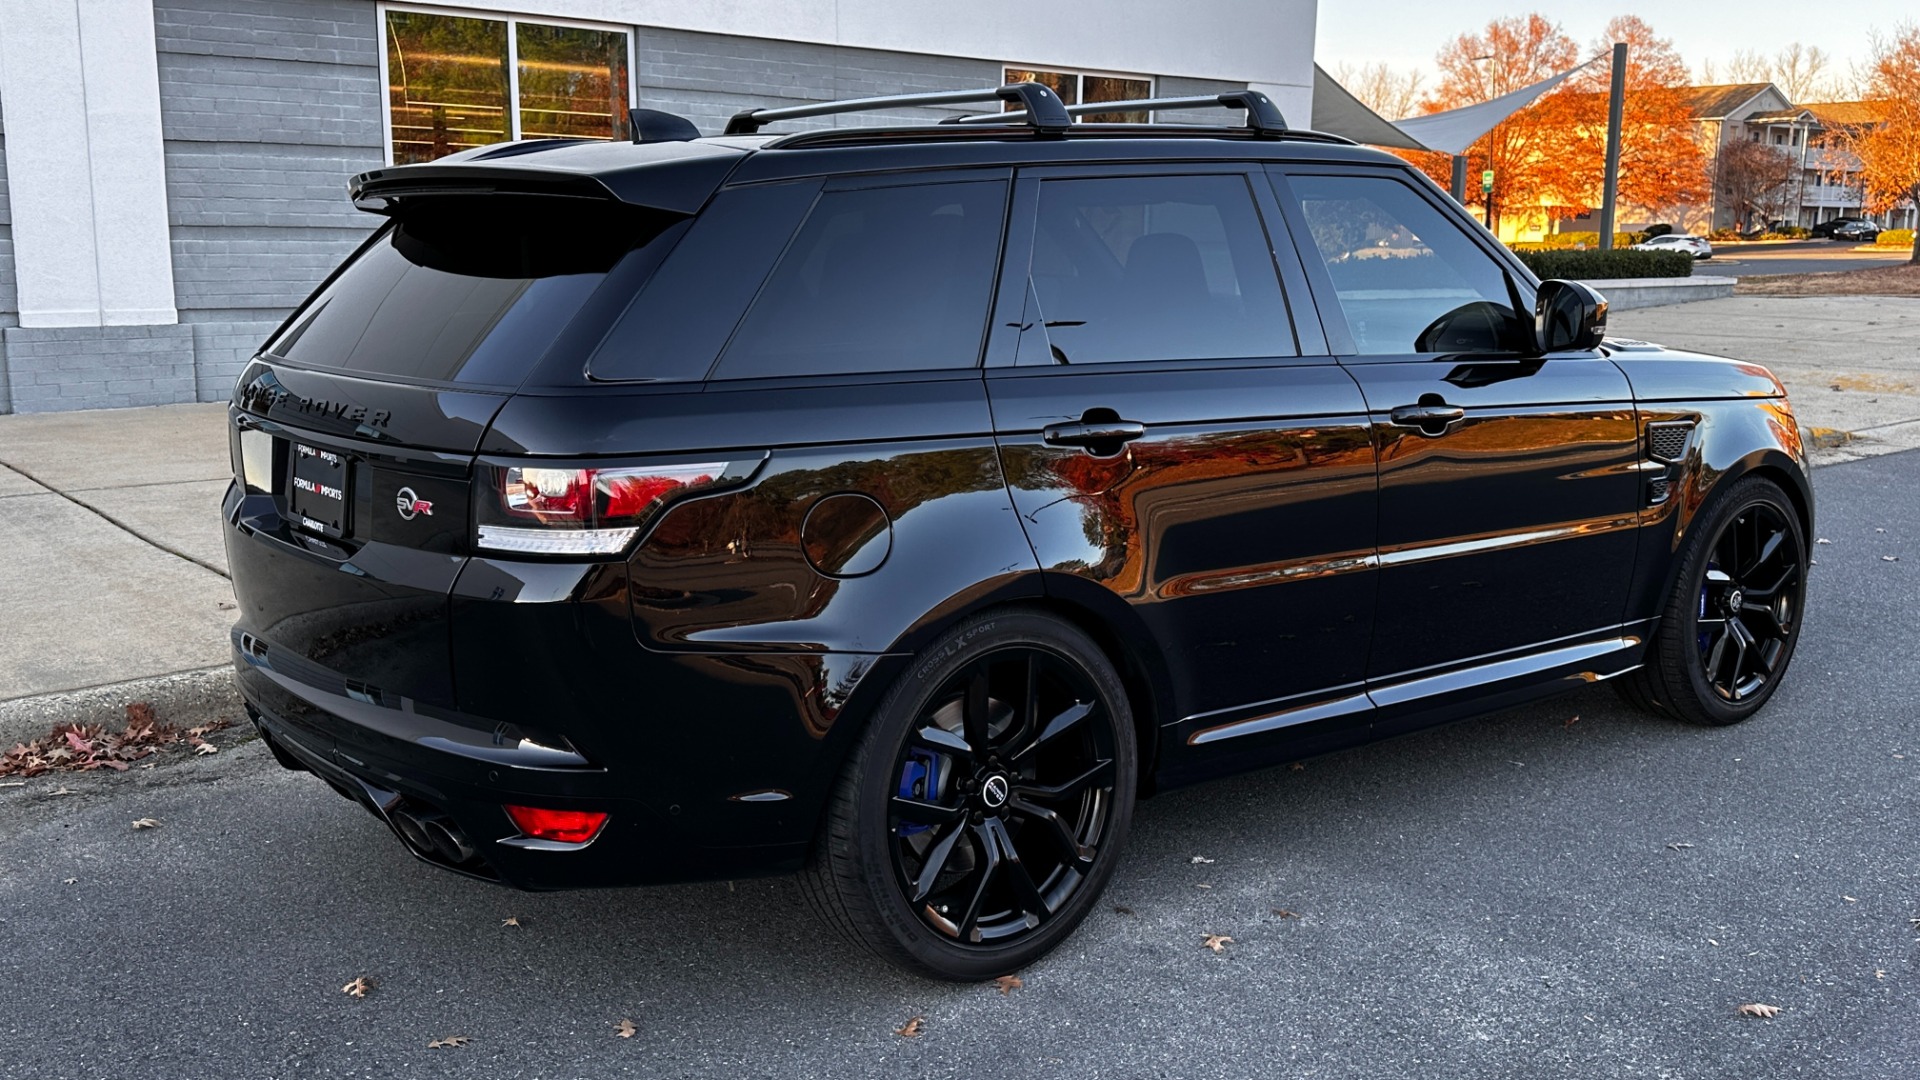 Used 2017 Land Rover Range Rover Sport SVR / DRIVE PRO PACKAGE / MERIDIAN SURROUND SOUND / SUPERCHARGED V8 / PANOR for sale $63,999 at Formula Imports in Charlotte NC 28227 3